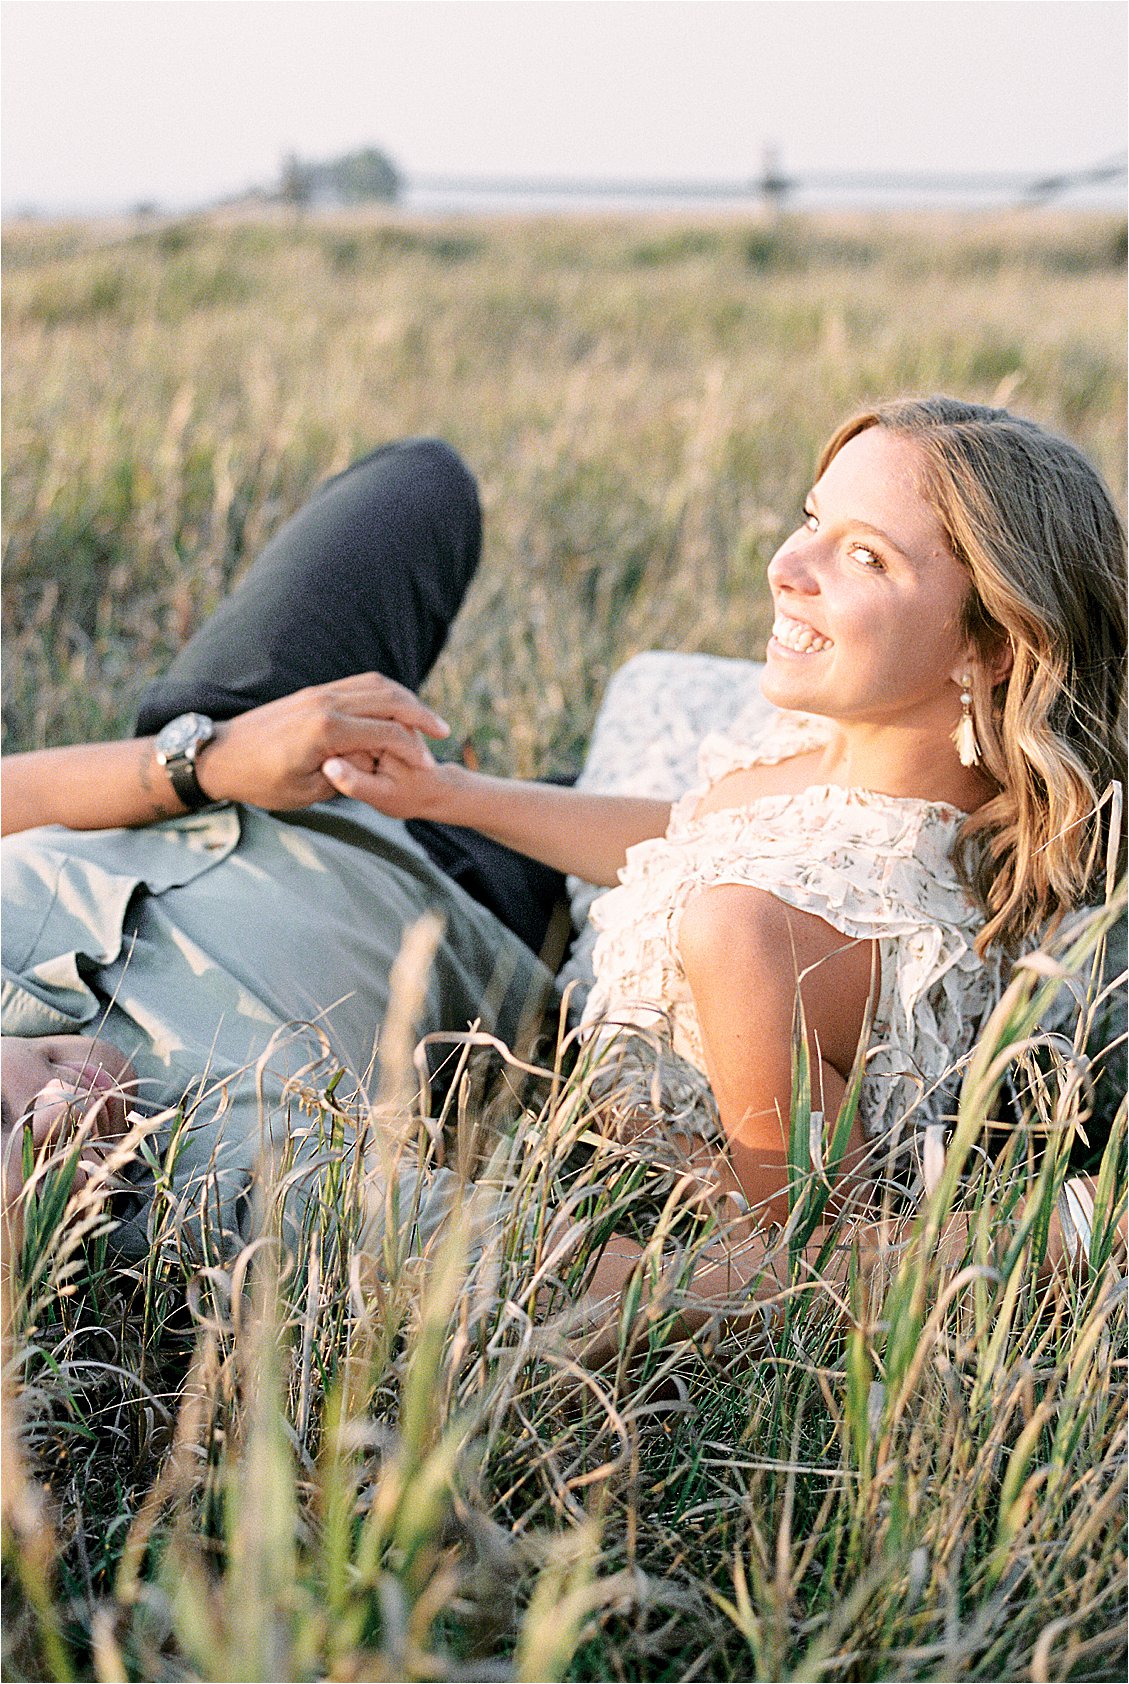 Summer engagement session photographed by film wedding photographer Renee Hollingshead in Wyoming